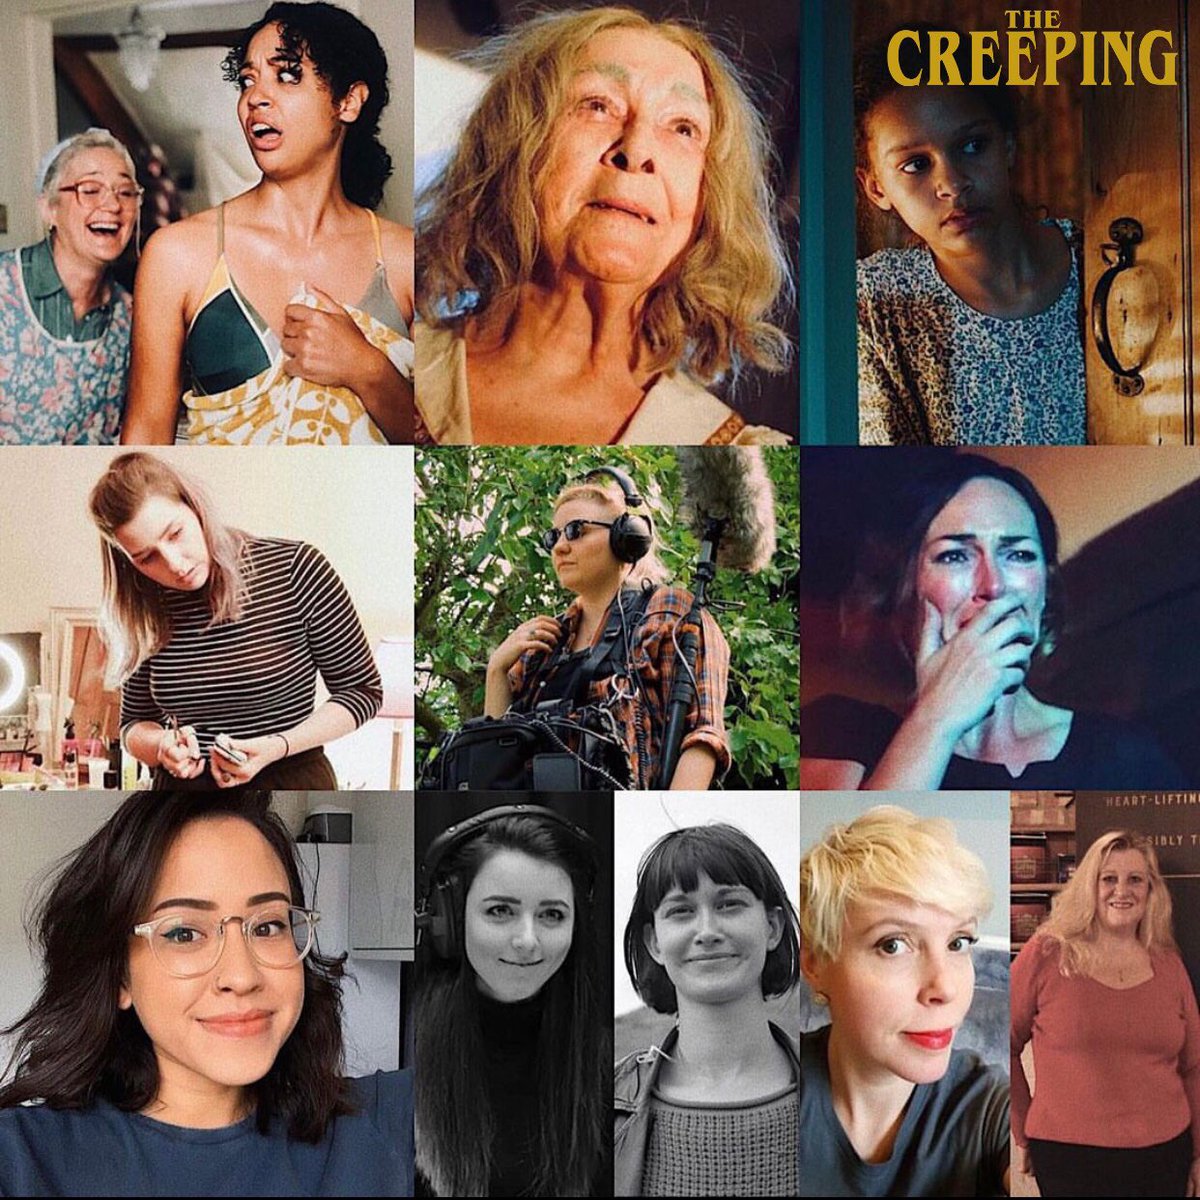 Happy International Women's Day to all the women of THE CREEPING. The film wouldn’t exist without their talent, skills and hard work. Women are amazing.
#TheCreeping #TheCreepingFilm #IWD2023 #IWD #InternationalWomensDay #FemaleFilmmakers